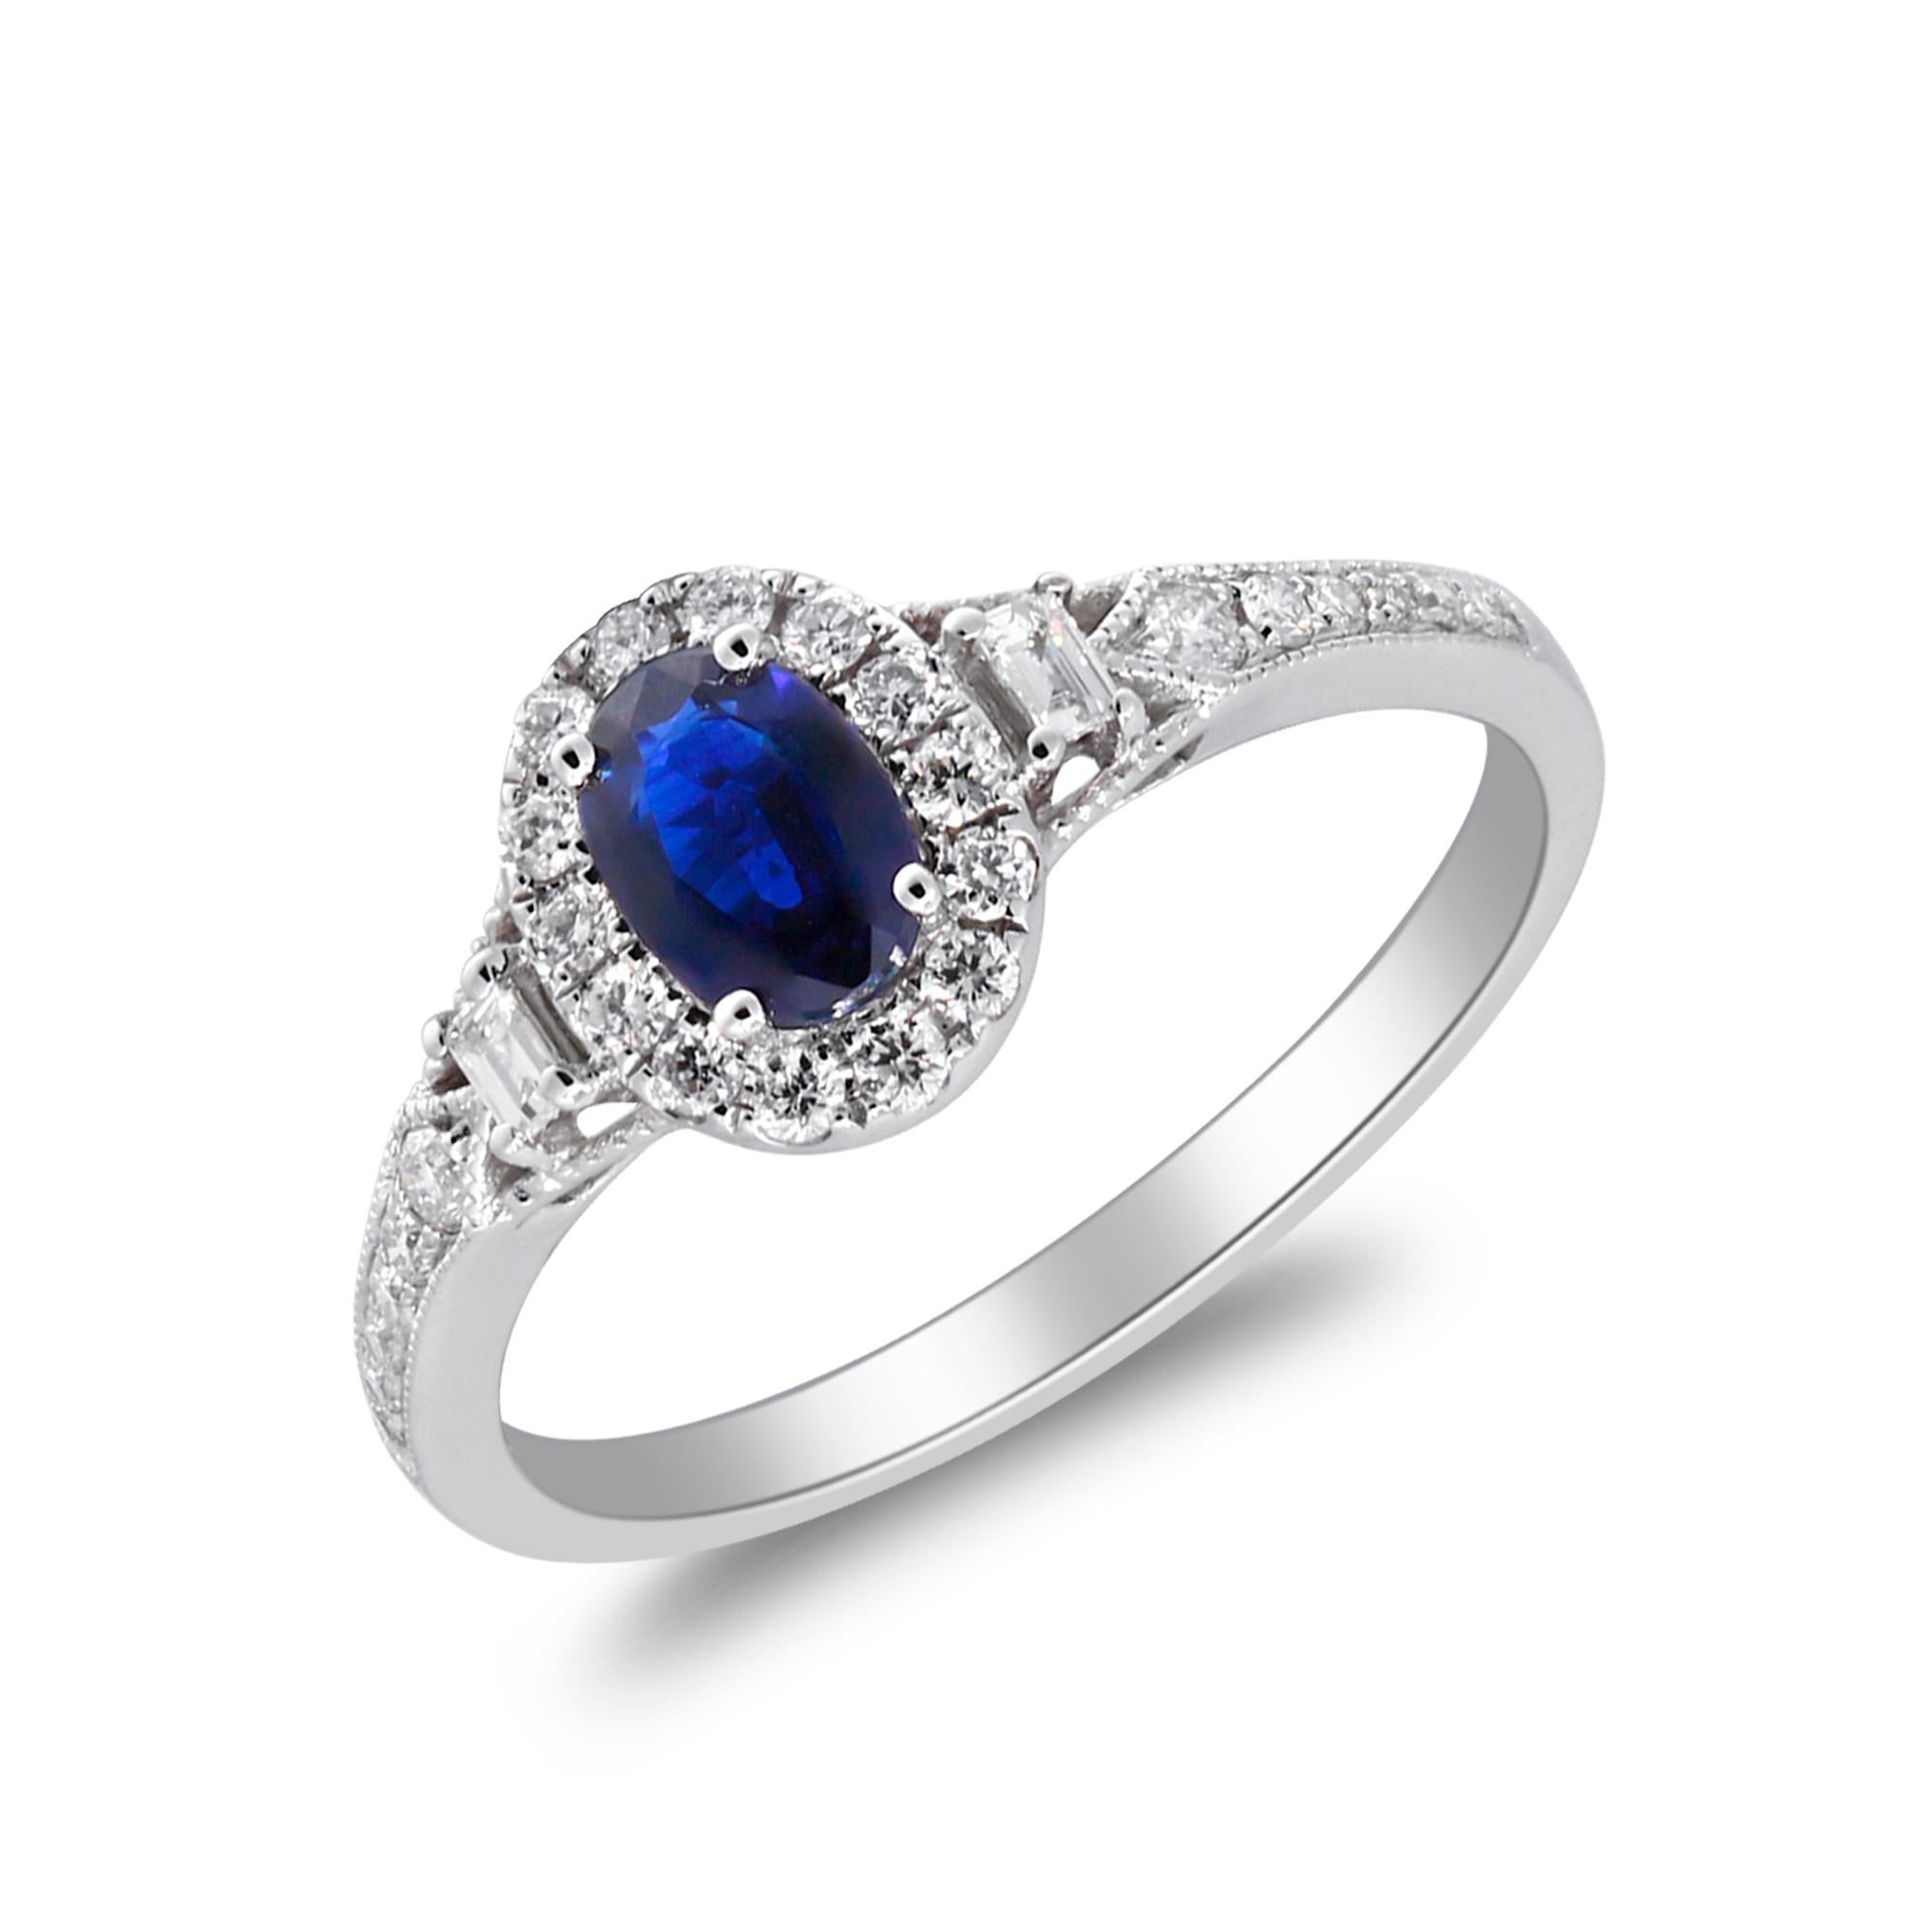 Oval Cut 0.58 Carat Oval-Cut Blue Sapphire with Diamond Accents 14K White Gold Ring For Sale